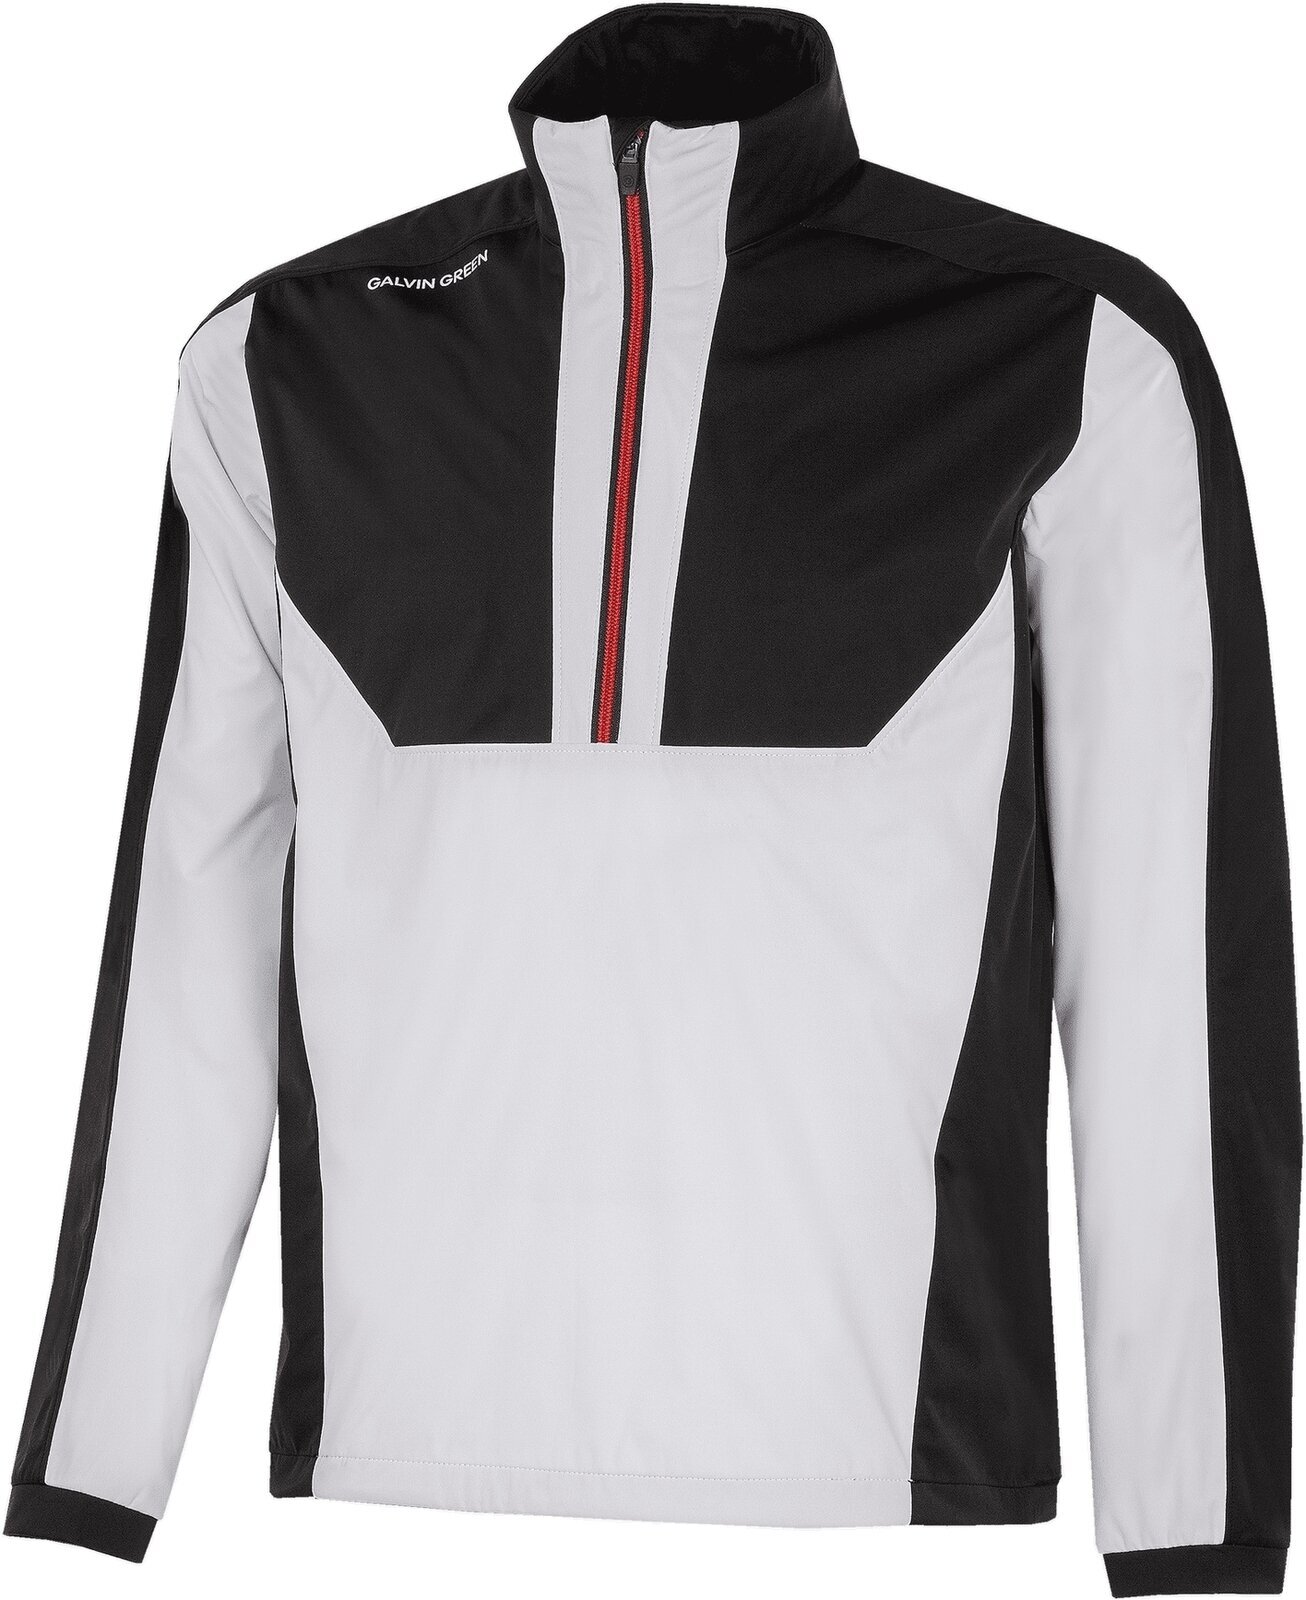 Jasje Galvin Green Lawrence Mens Windproof And Water Repellent Jacket White/Black/Red XL